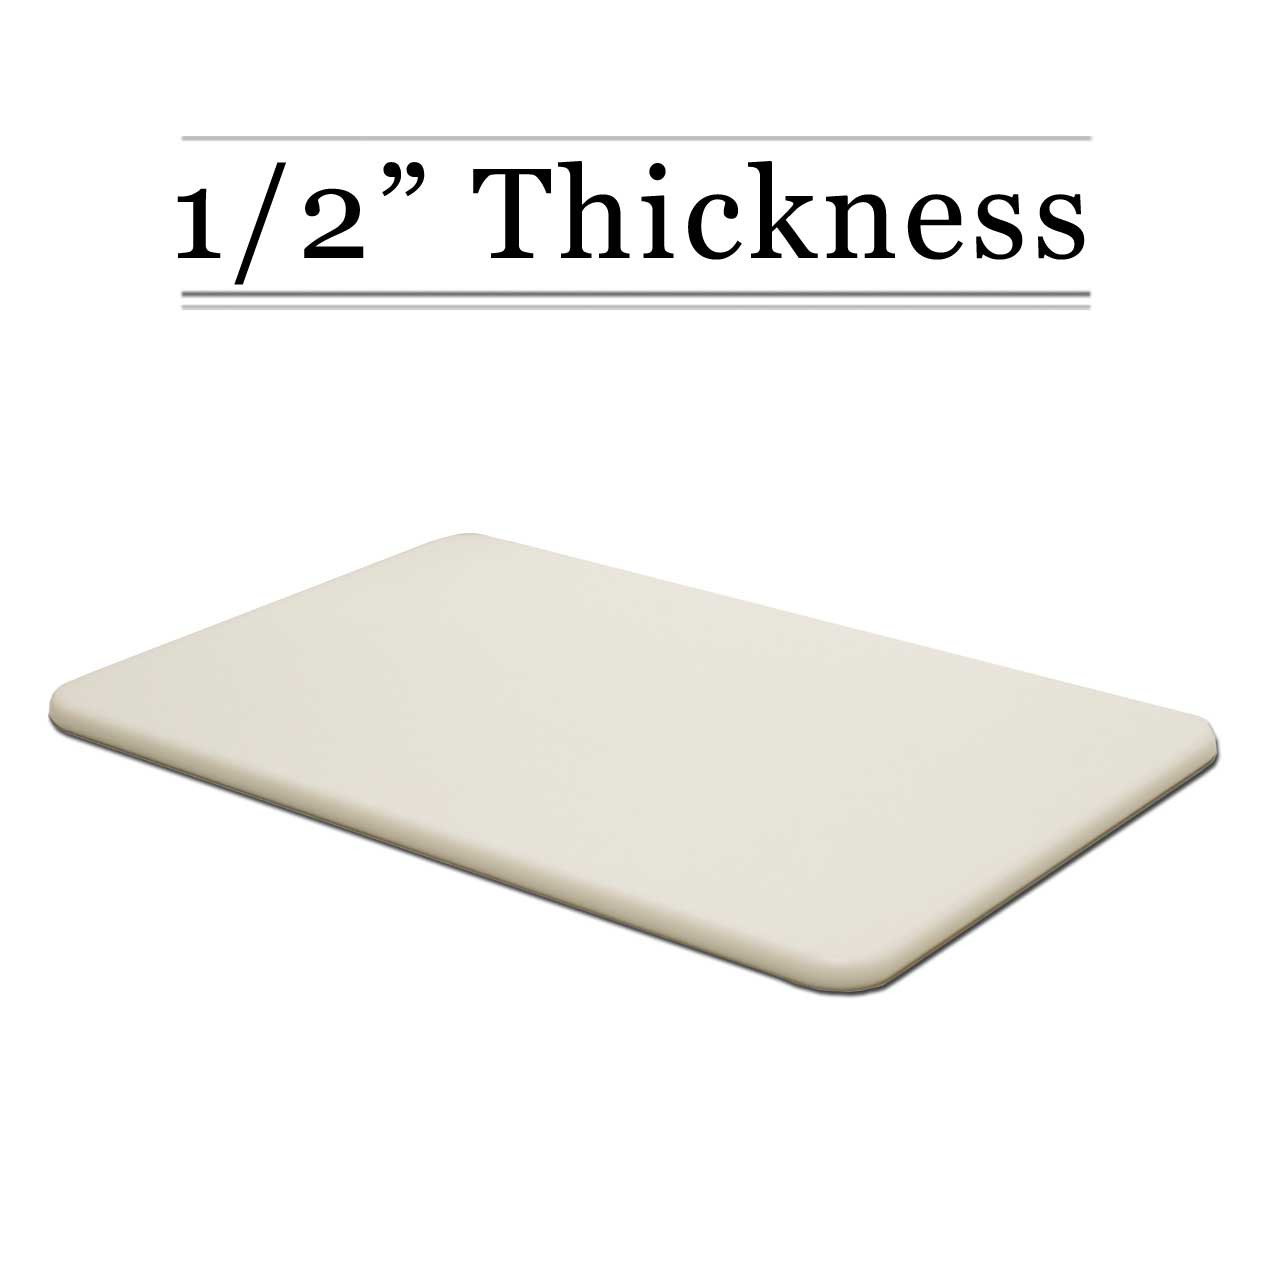 thick cutting board